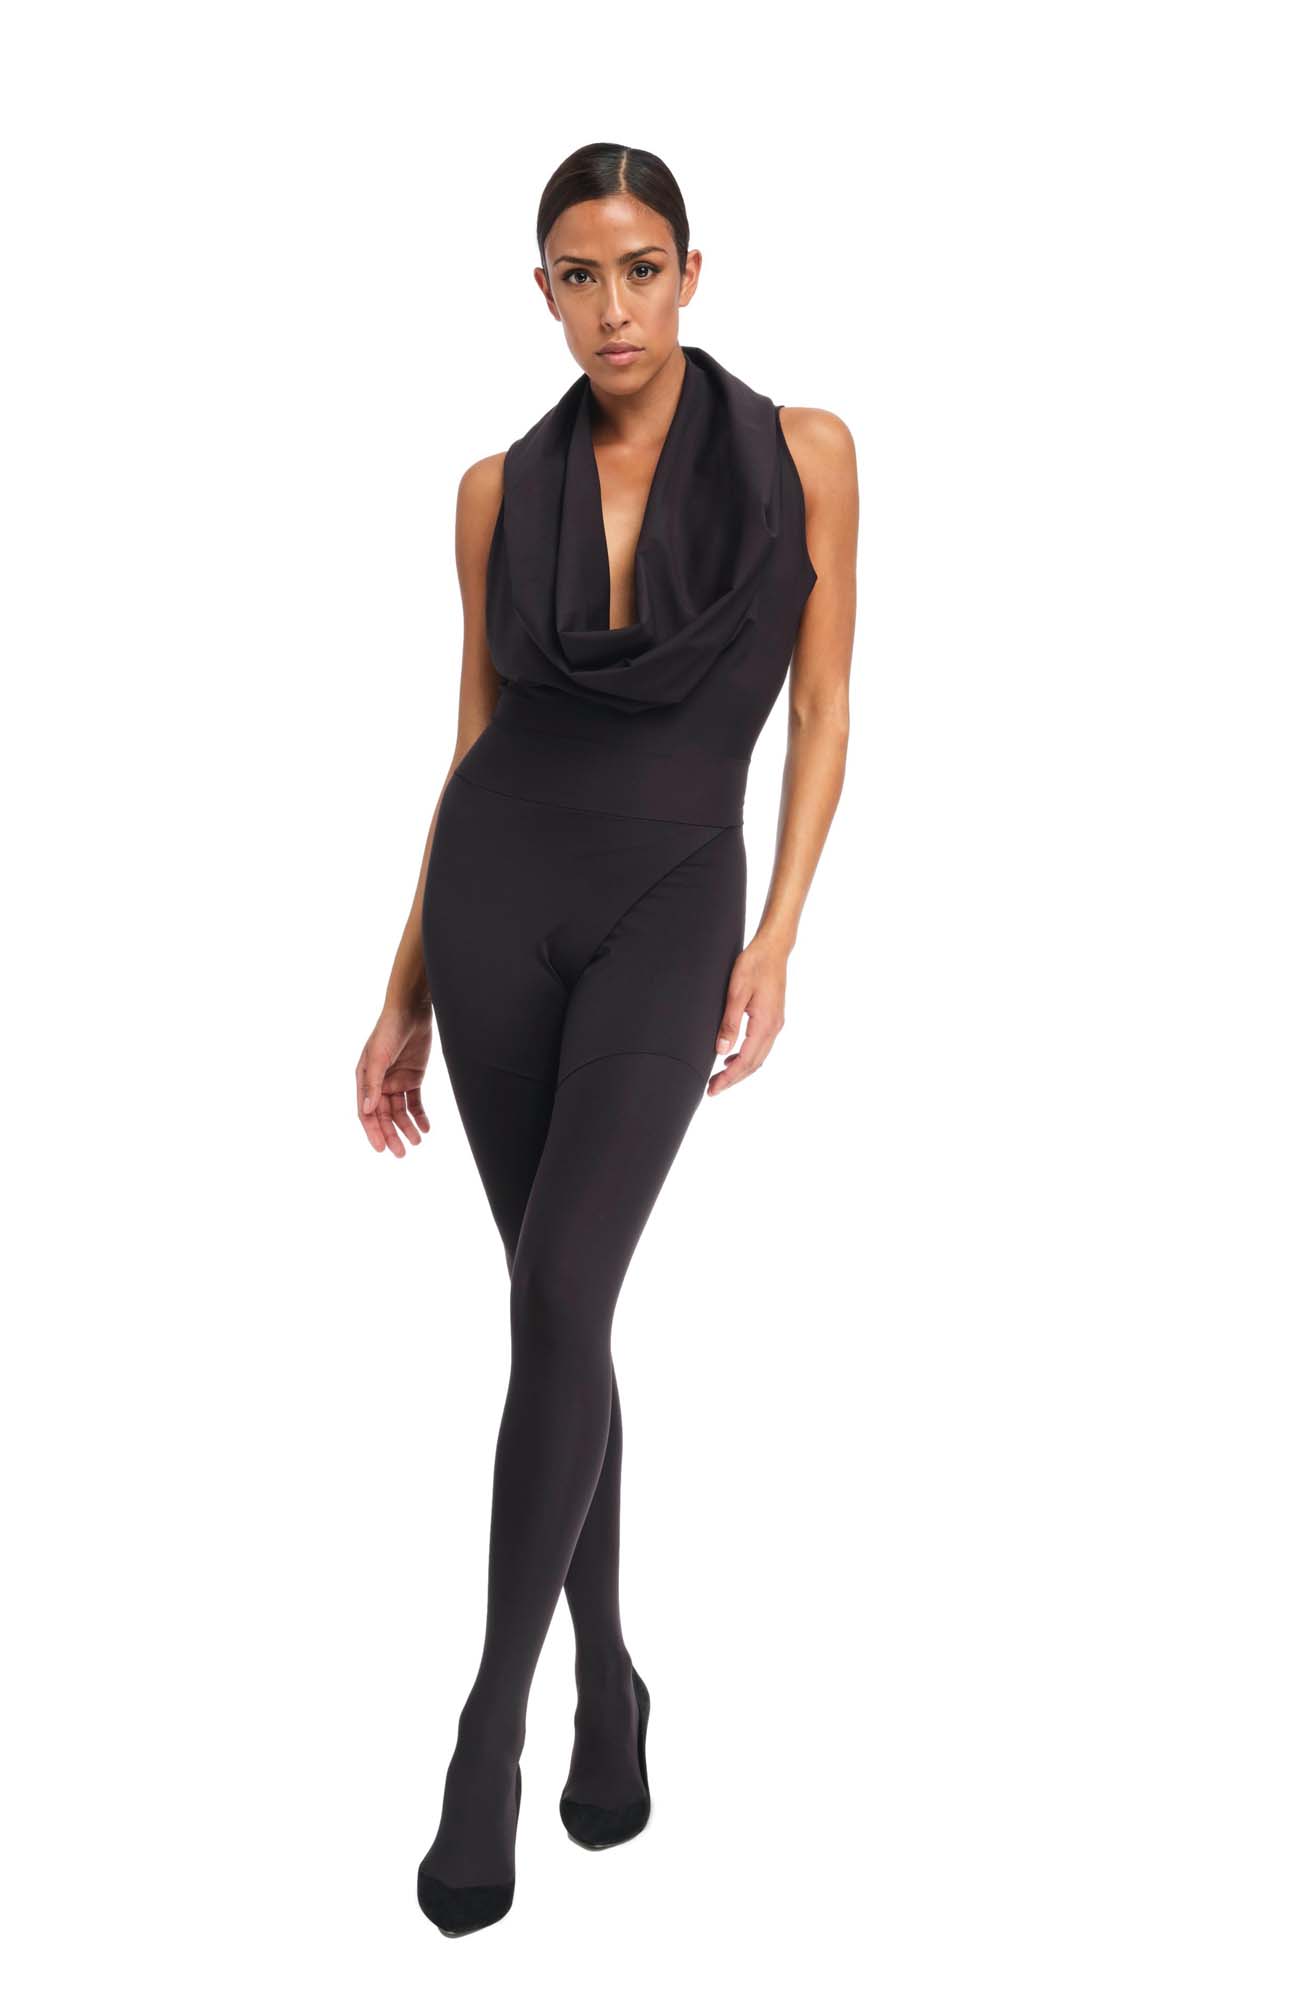 1708 / Shadow Full Body Suit / Silver – DSTM